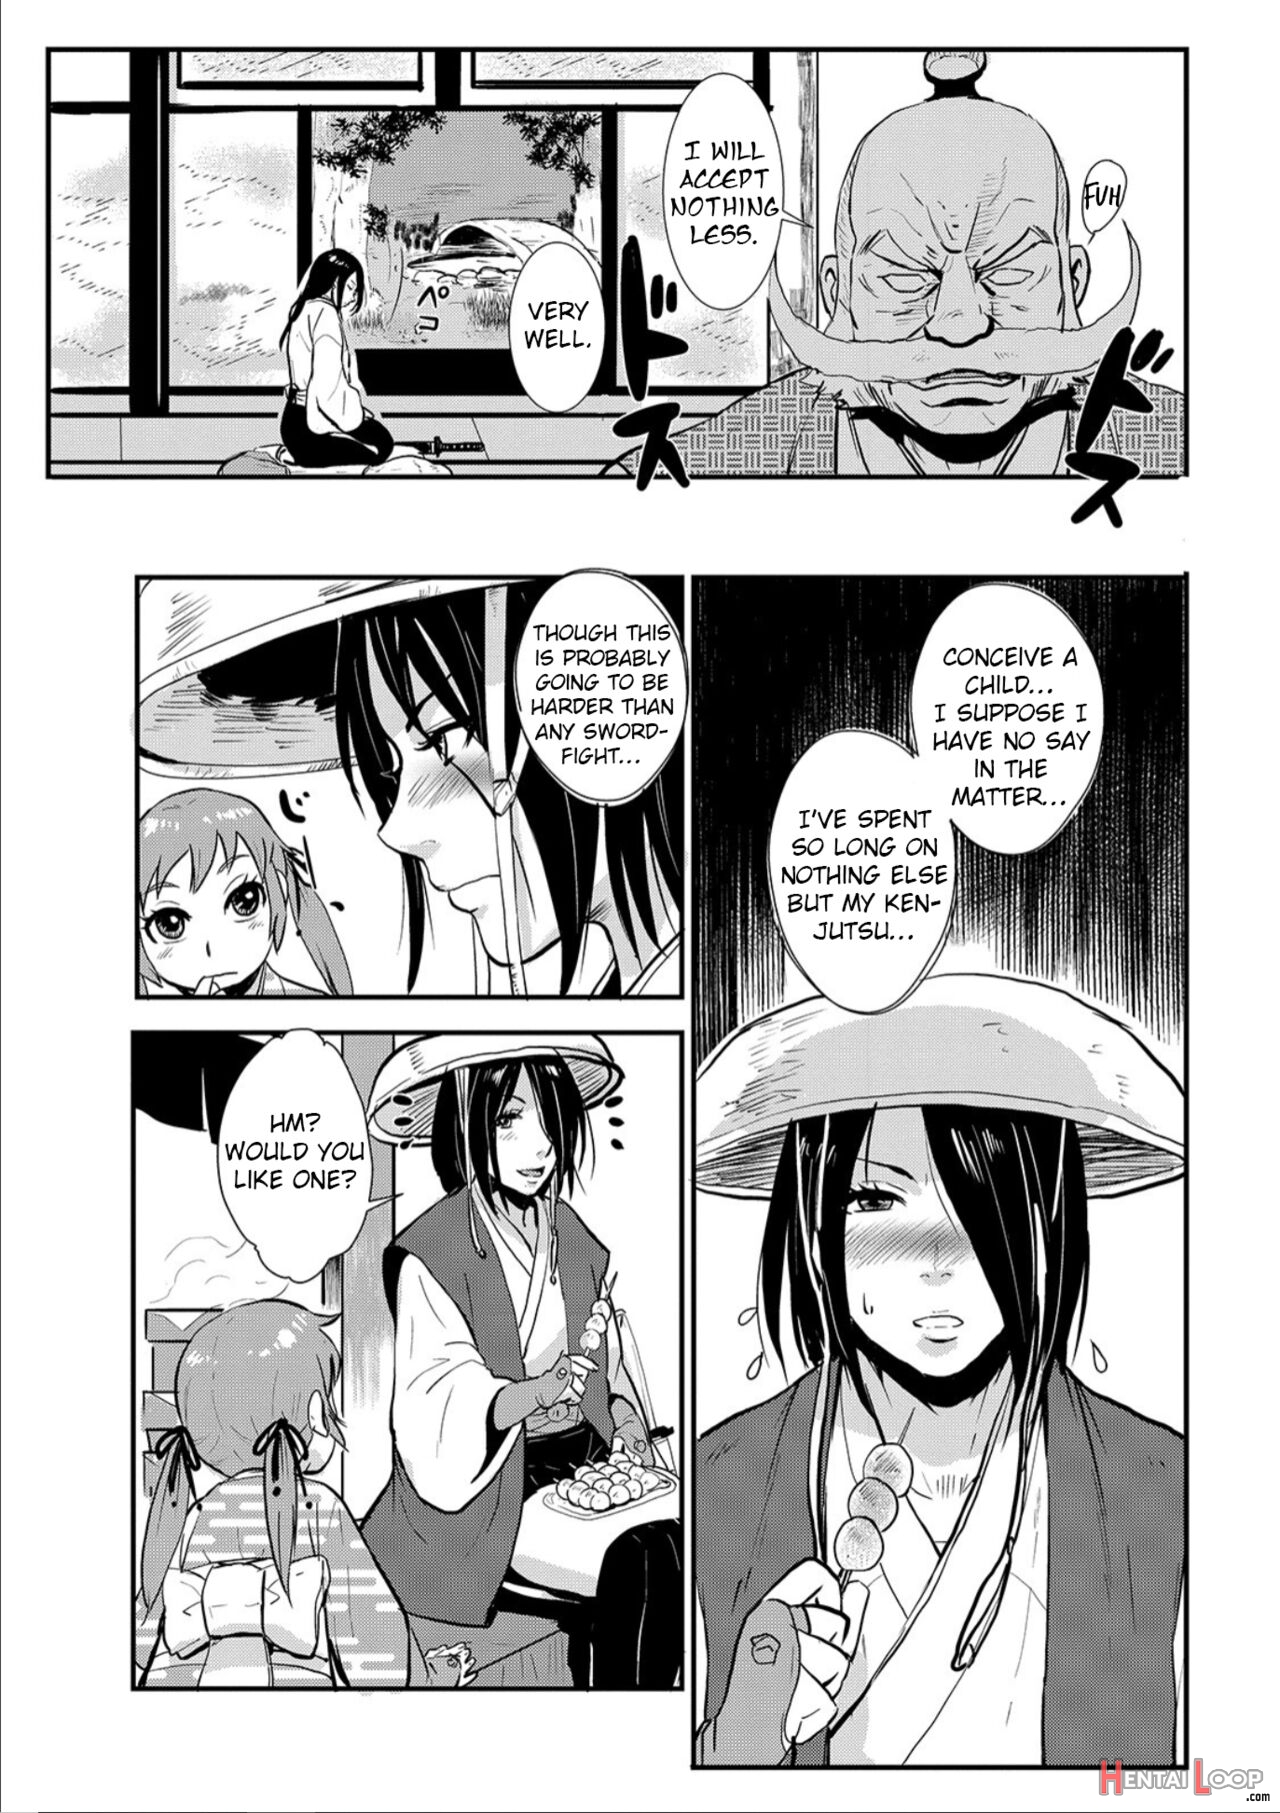 Knocked Up Samurai 01: A Woman’s Journey To Get Pregnant page 3